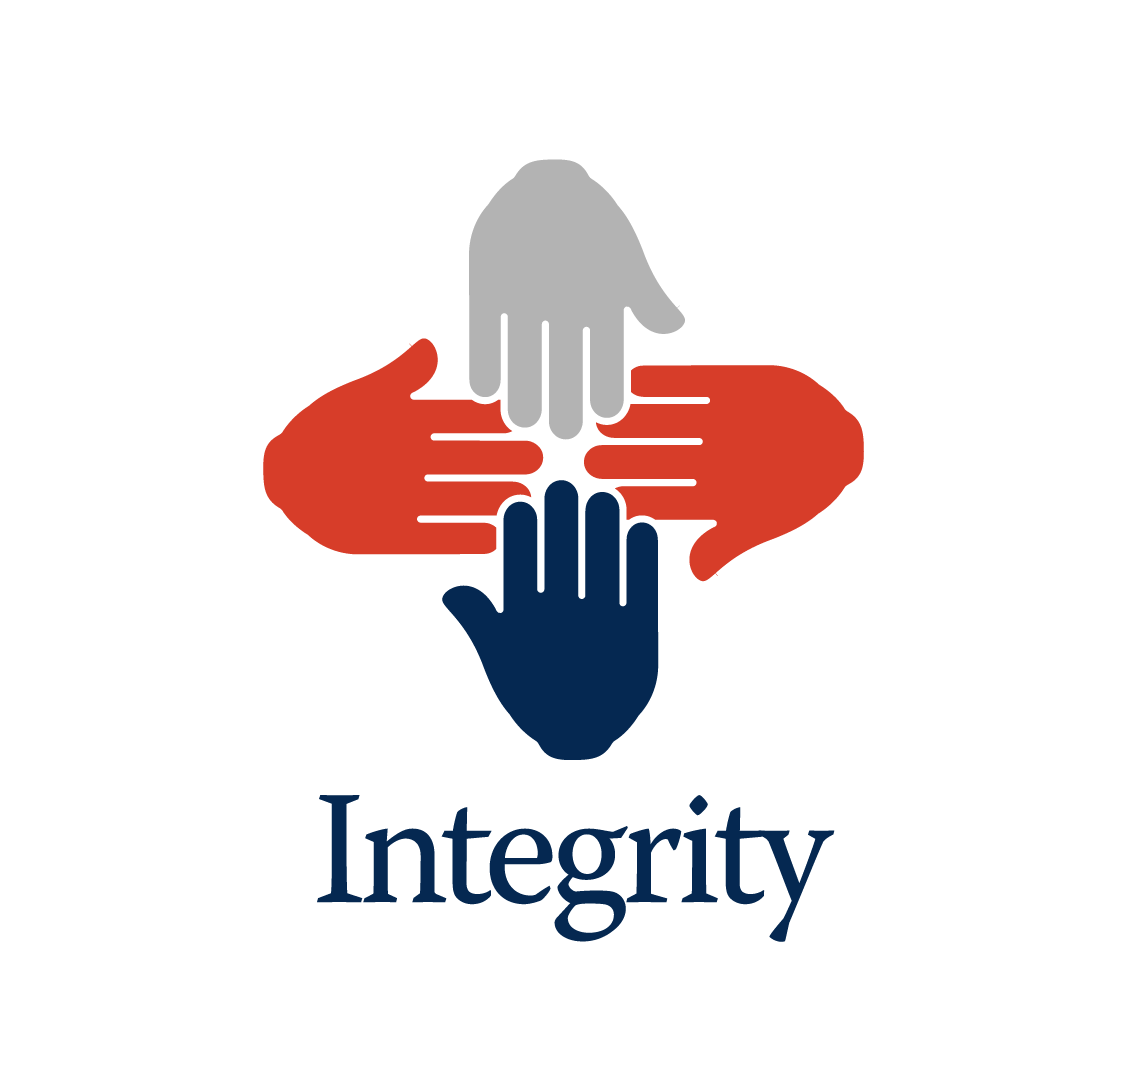 Integrity logo 4 hands of different colours touching finger tips